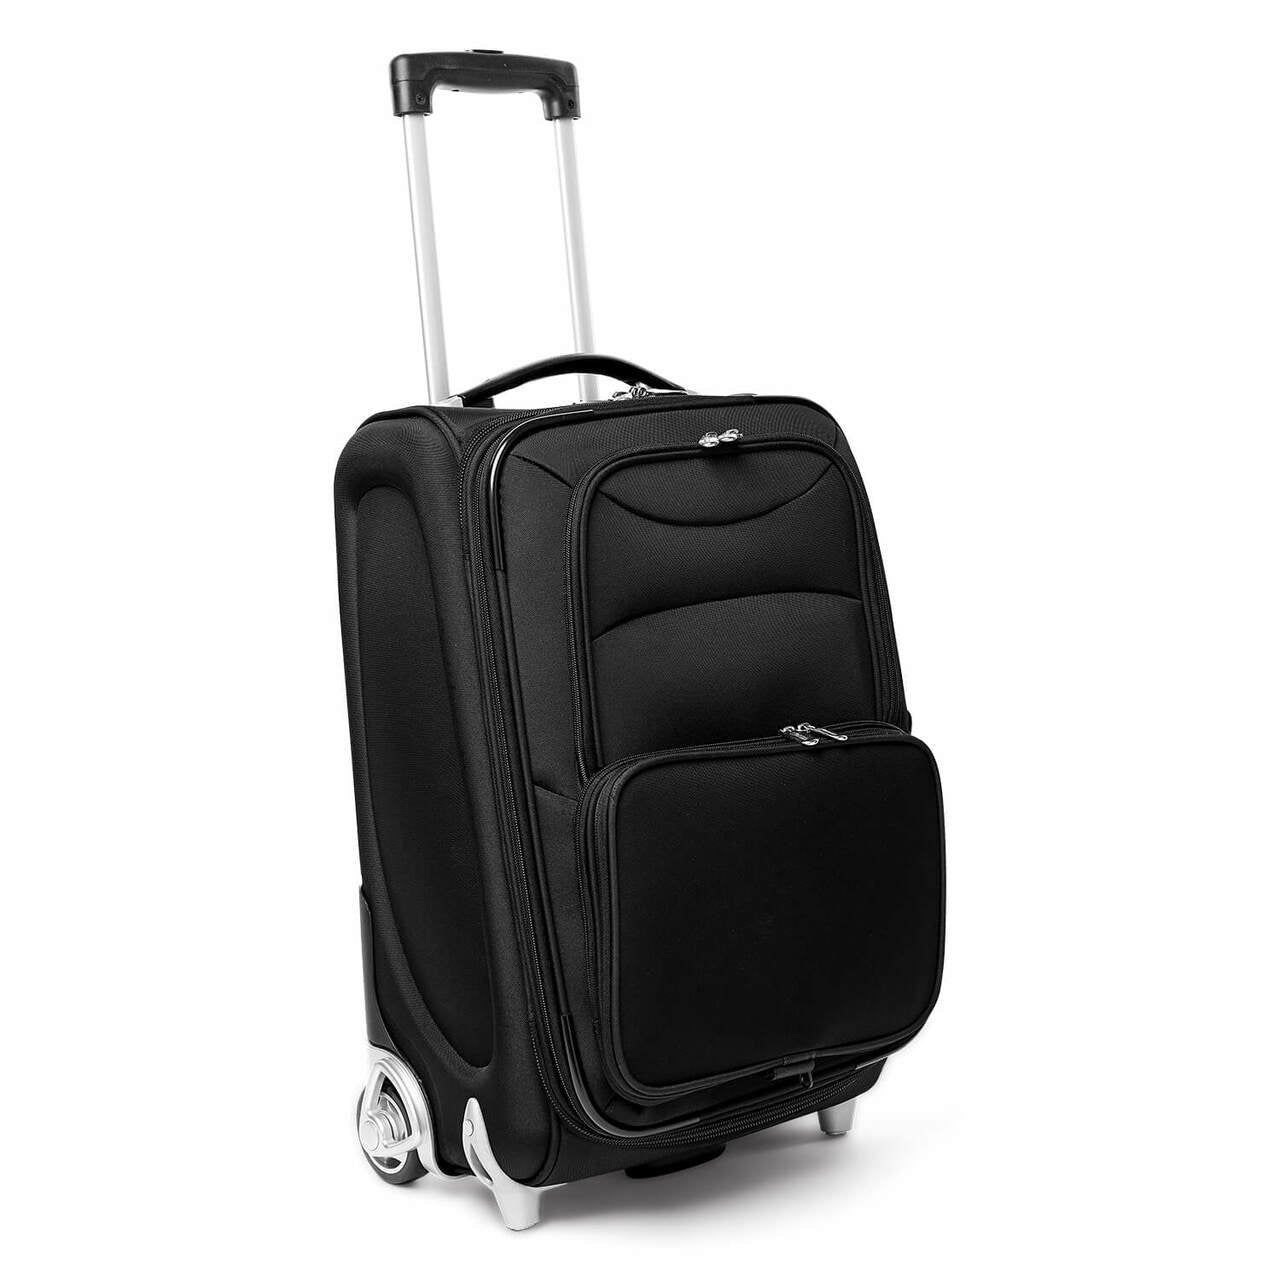 Saints Carry On Luggage | New Orleans Saints Rolling Carry On Luggage